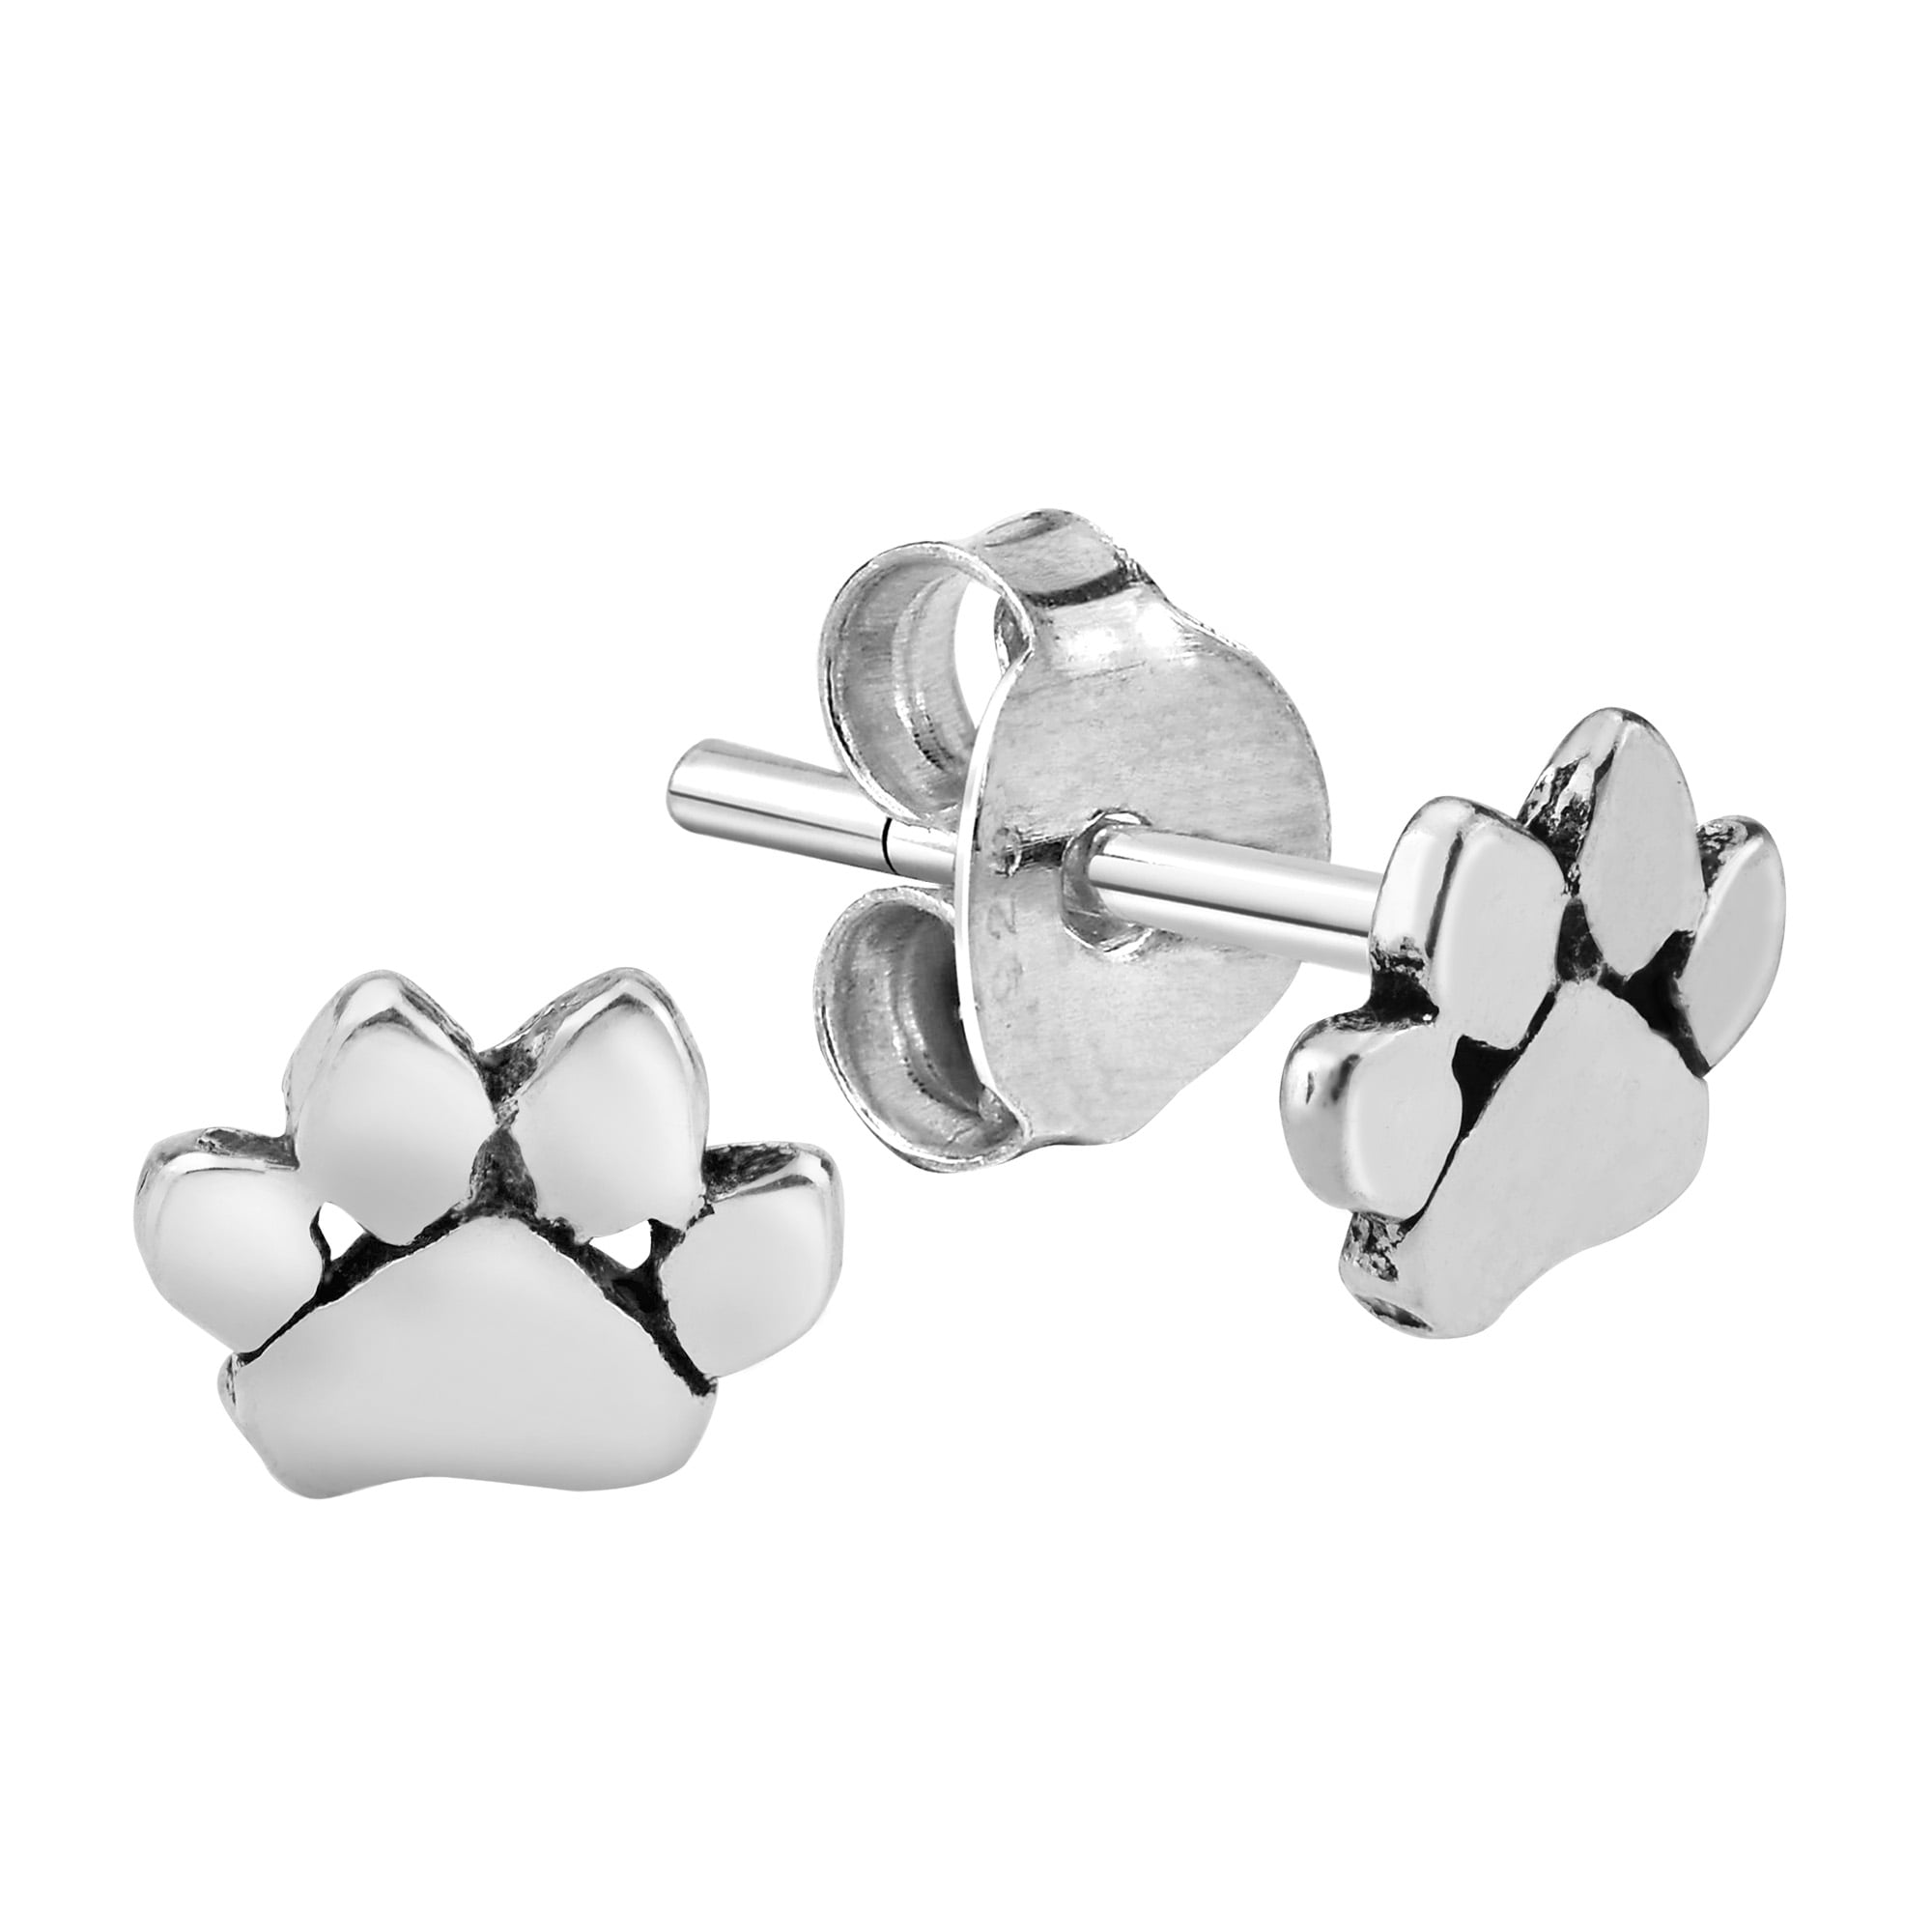 White Gold Finish Tiny Stud Paw Print Earrings 1.5 Ct Round Cut White Sapphire Dog paw Stud Earrings 925 Sterling Silver Dog Lover Gift